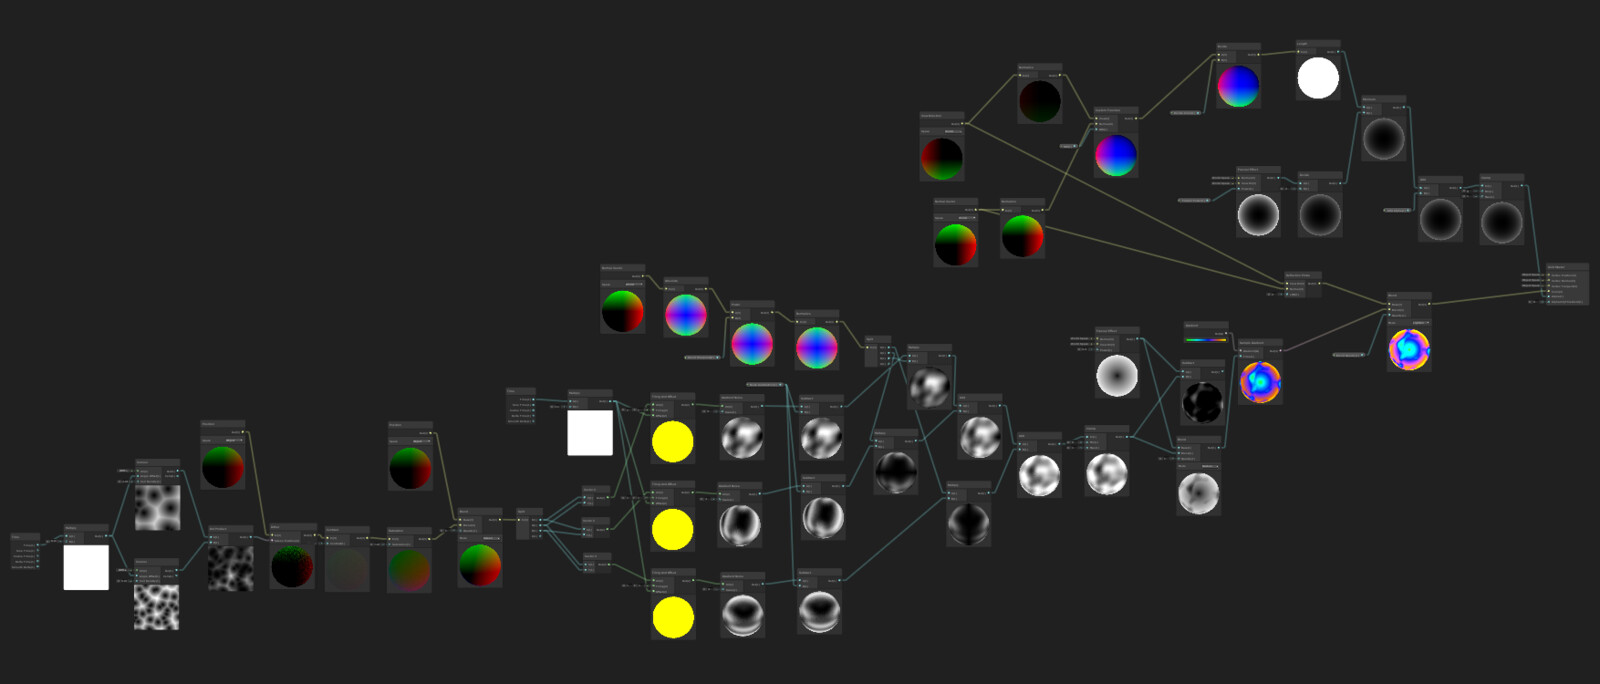 Bubble Material Shader Editor Nodes in Unity